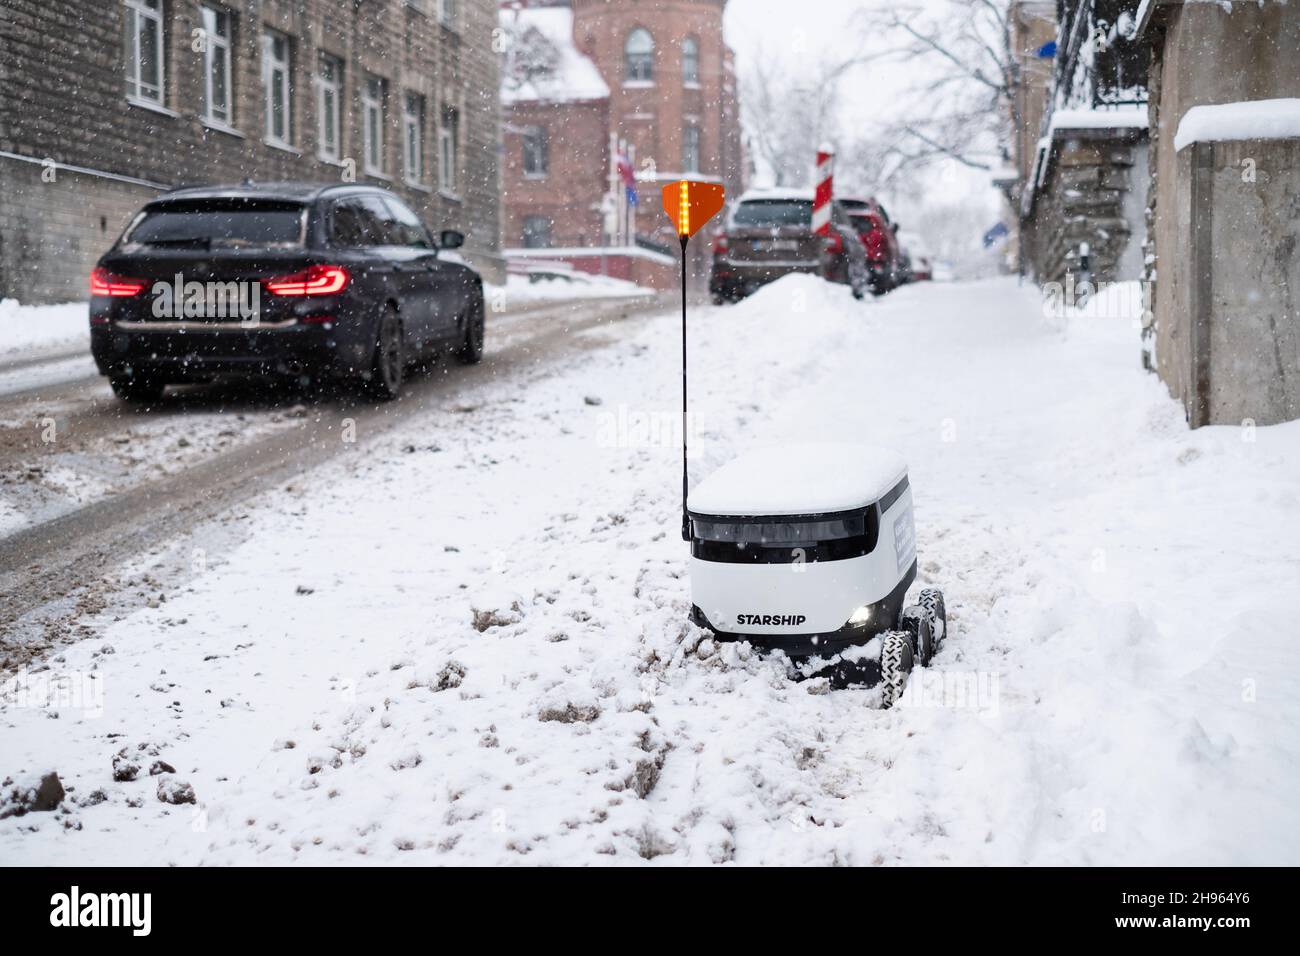 Tallinn, Estonia - December 4, 2021: Starship Technologies autonomous drone vehicle stuck in snow in winter. Self driving contactless delivery robot. Stock Photo